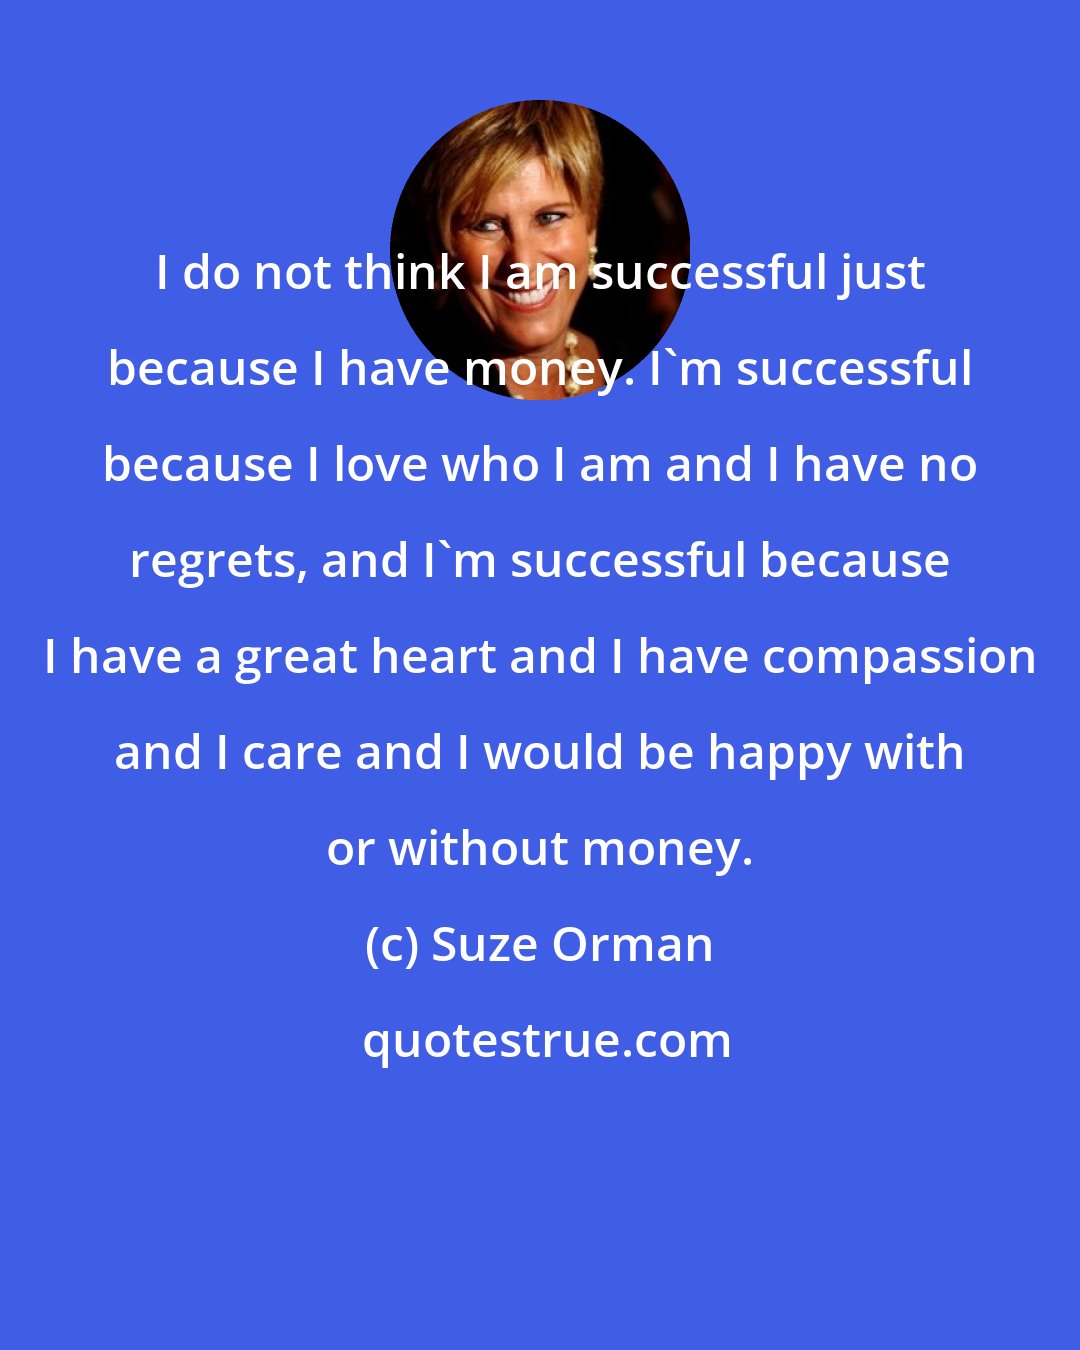 Suze Orman: I do not think I am successful just because I have money. I'm successful because I love who I am and I have no regrets, and I'm successful because I have a great heart and I have compassion and I care and I would be happy with or without money.